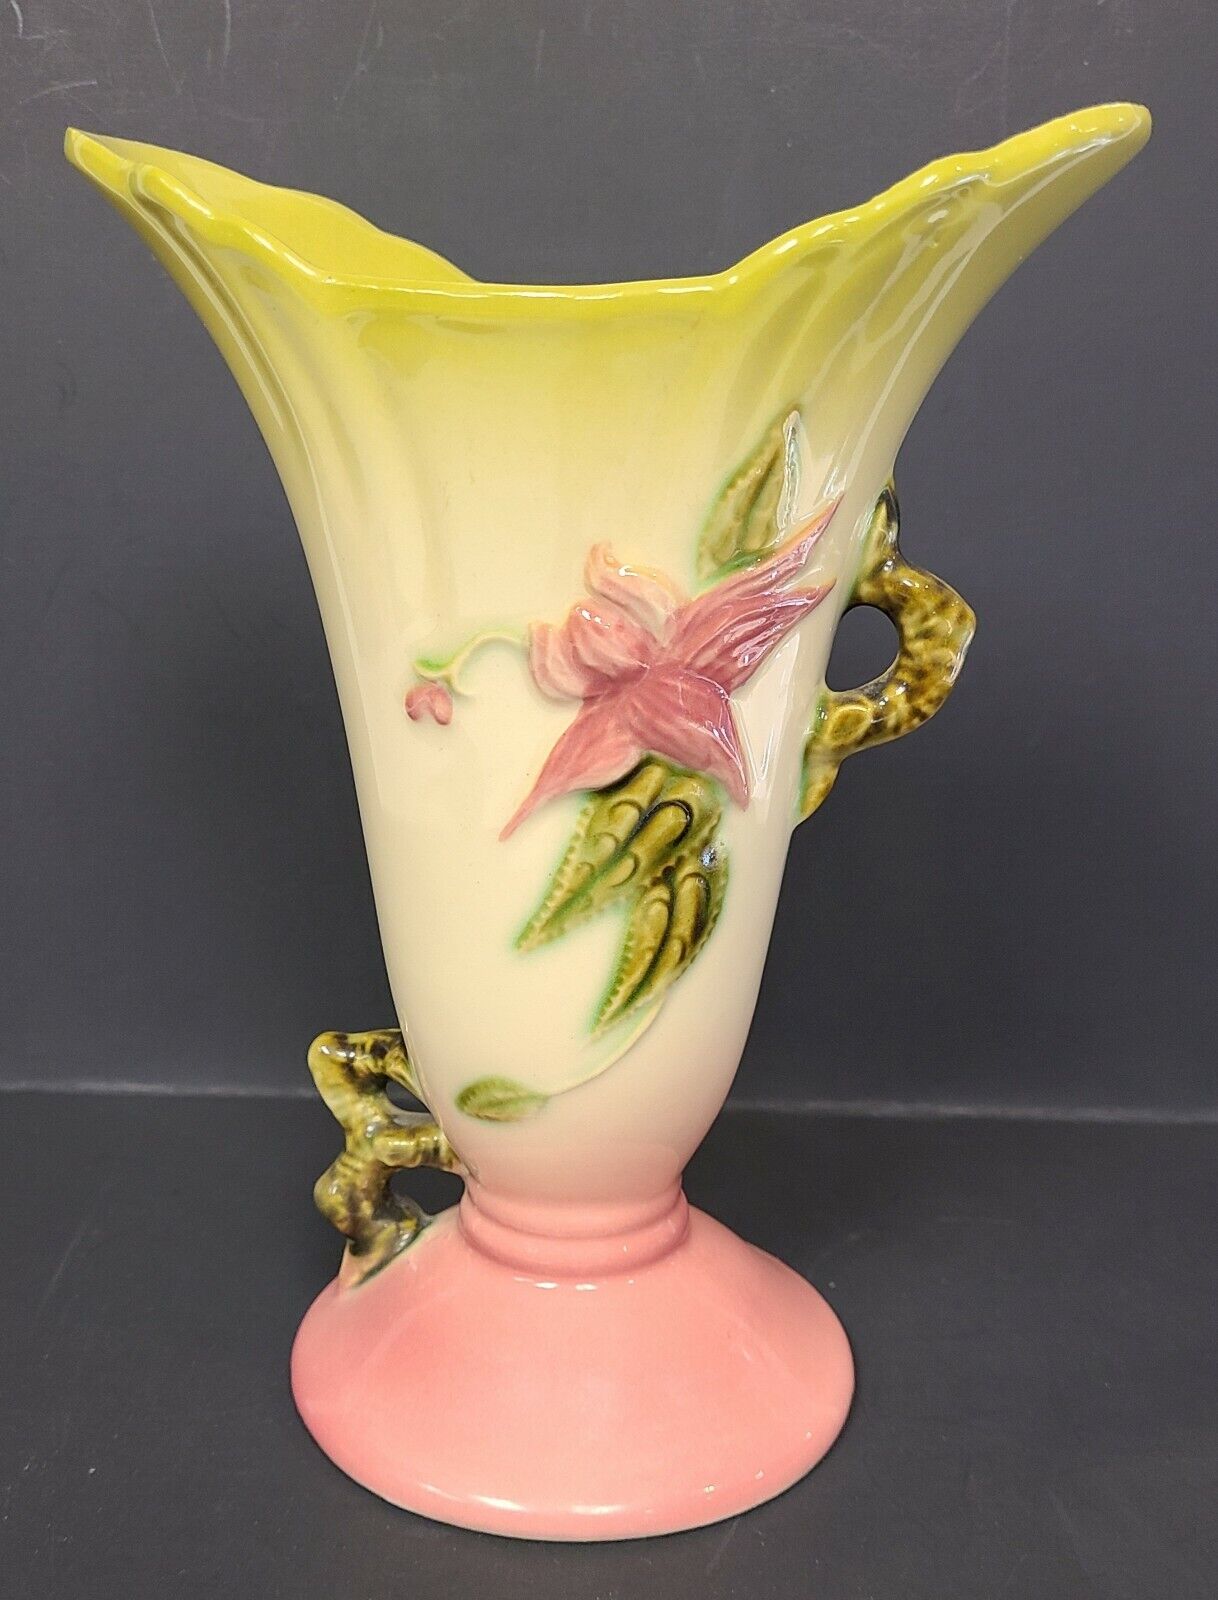 Hull W8 7 1/2 USA Woodland Pottery Vase Yellow Pink Green Flower